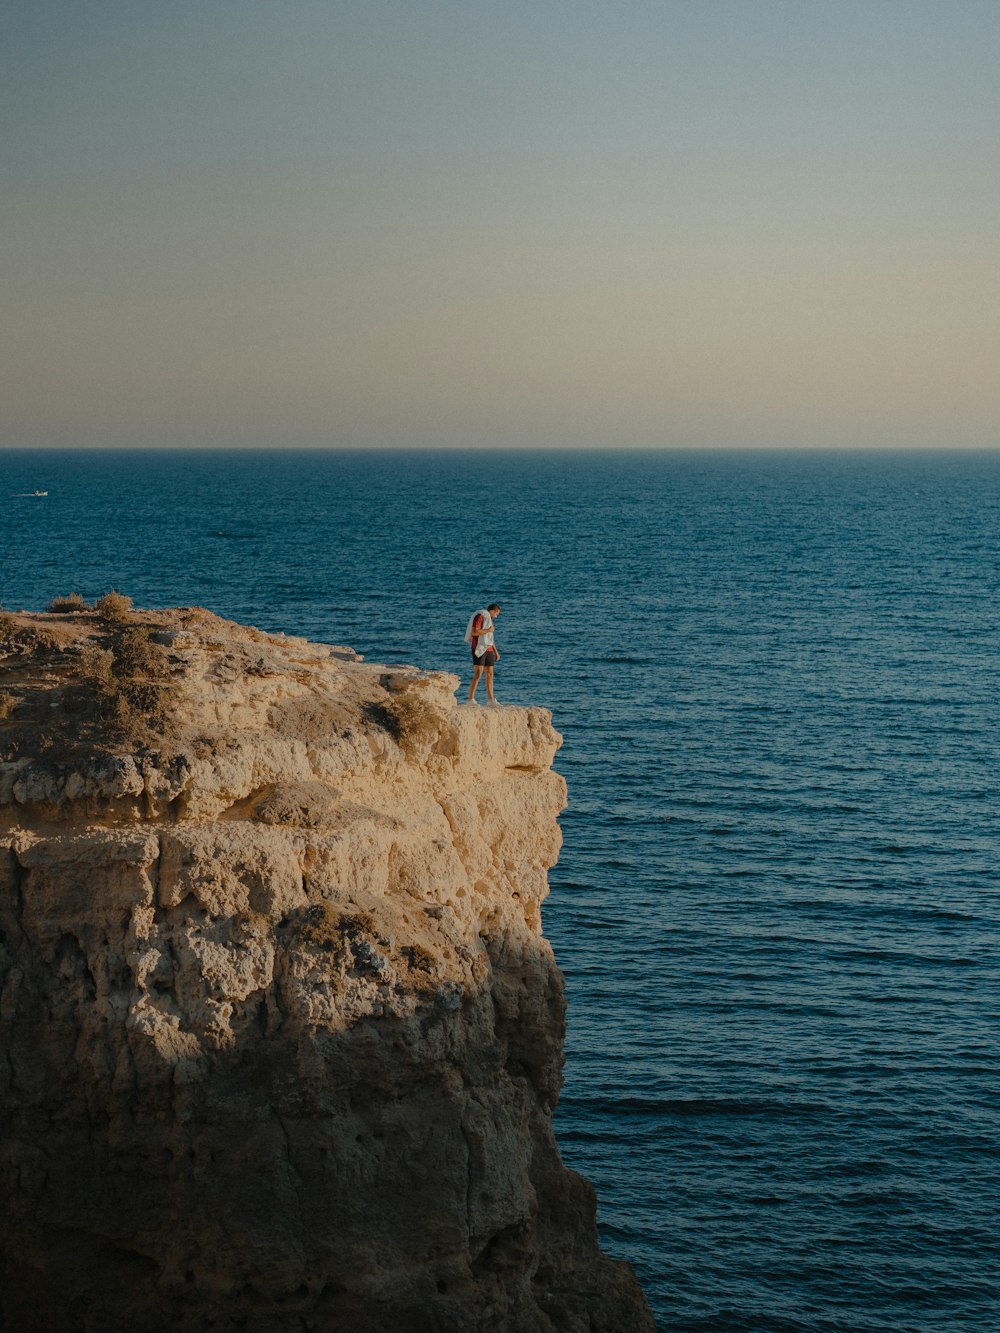 a person standing on a cliff above the ocean